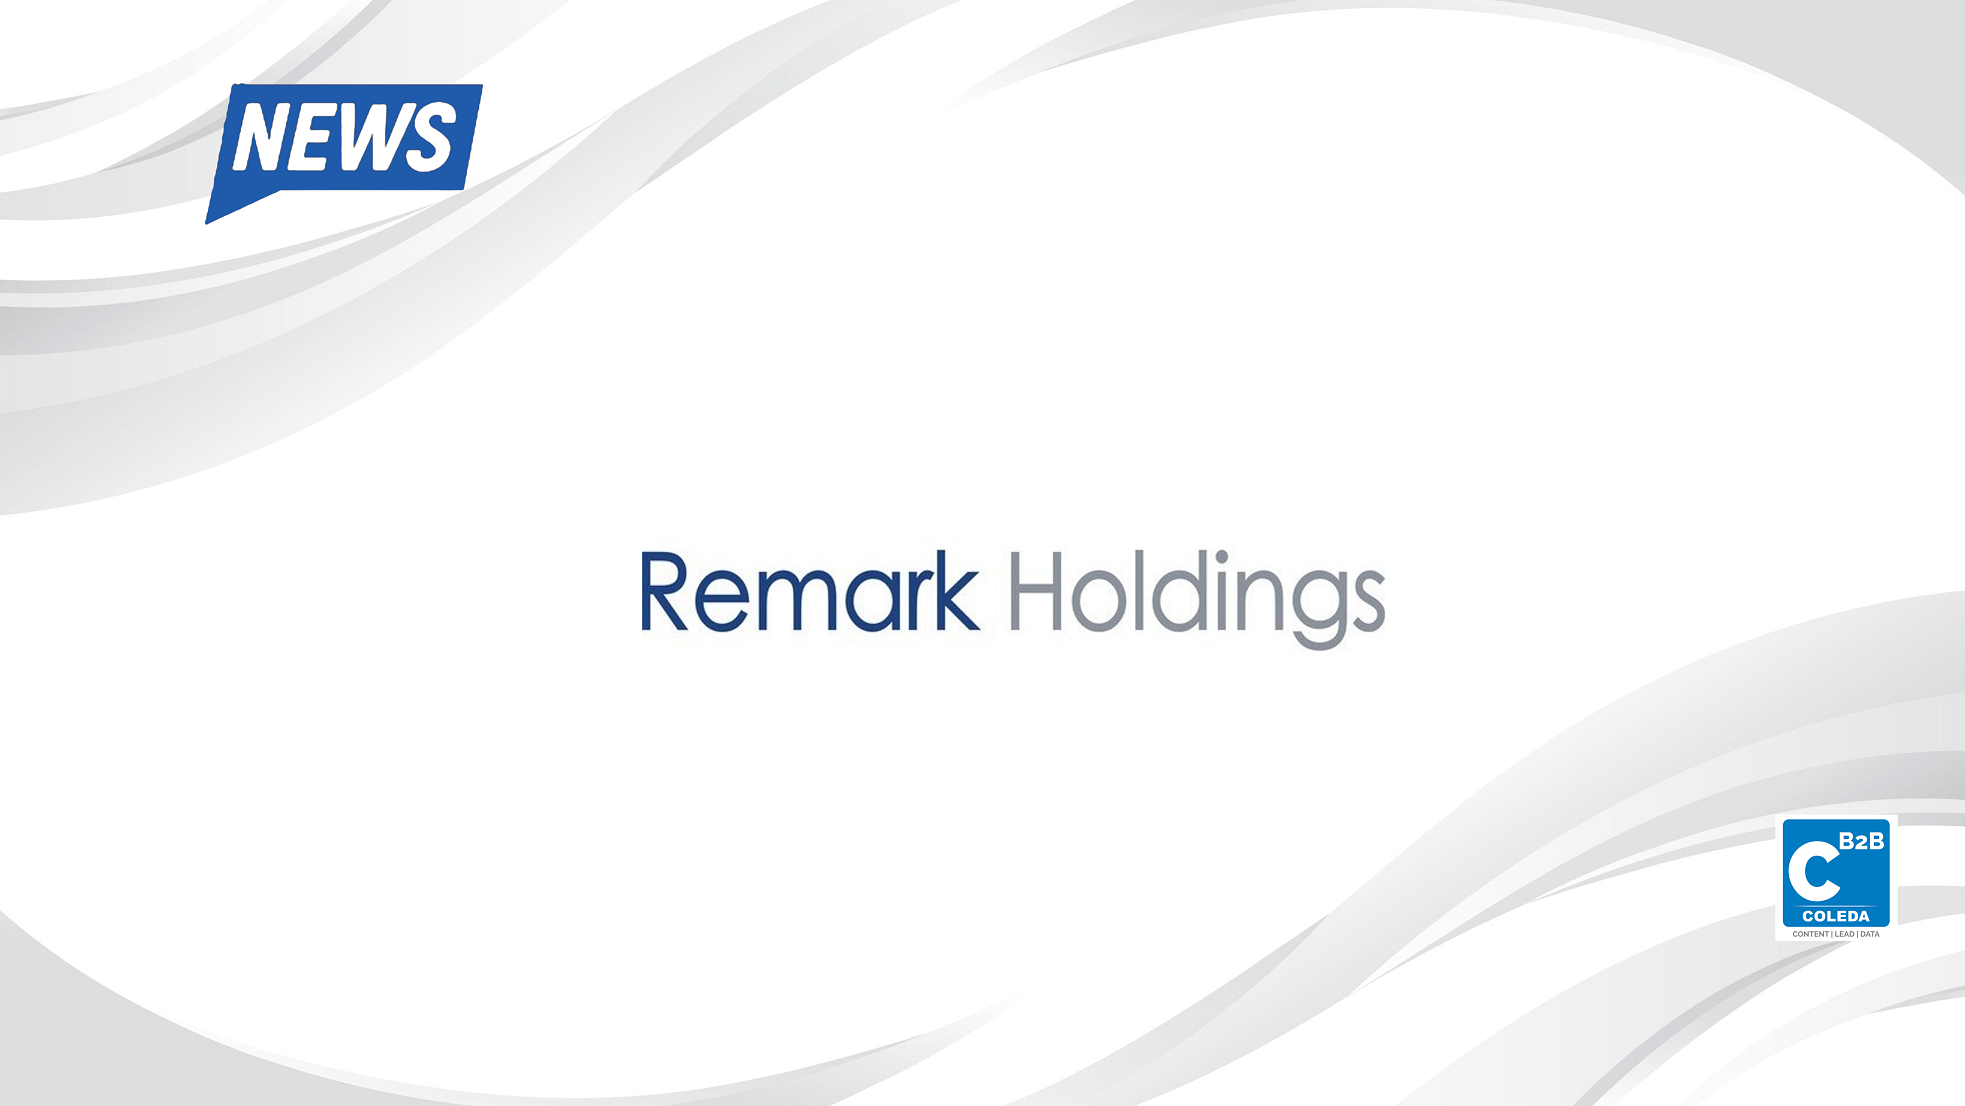 Remark Holdings announces partnership with AAEON